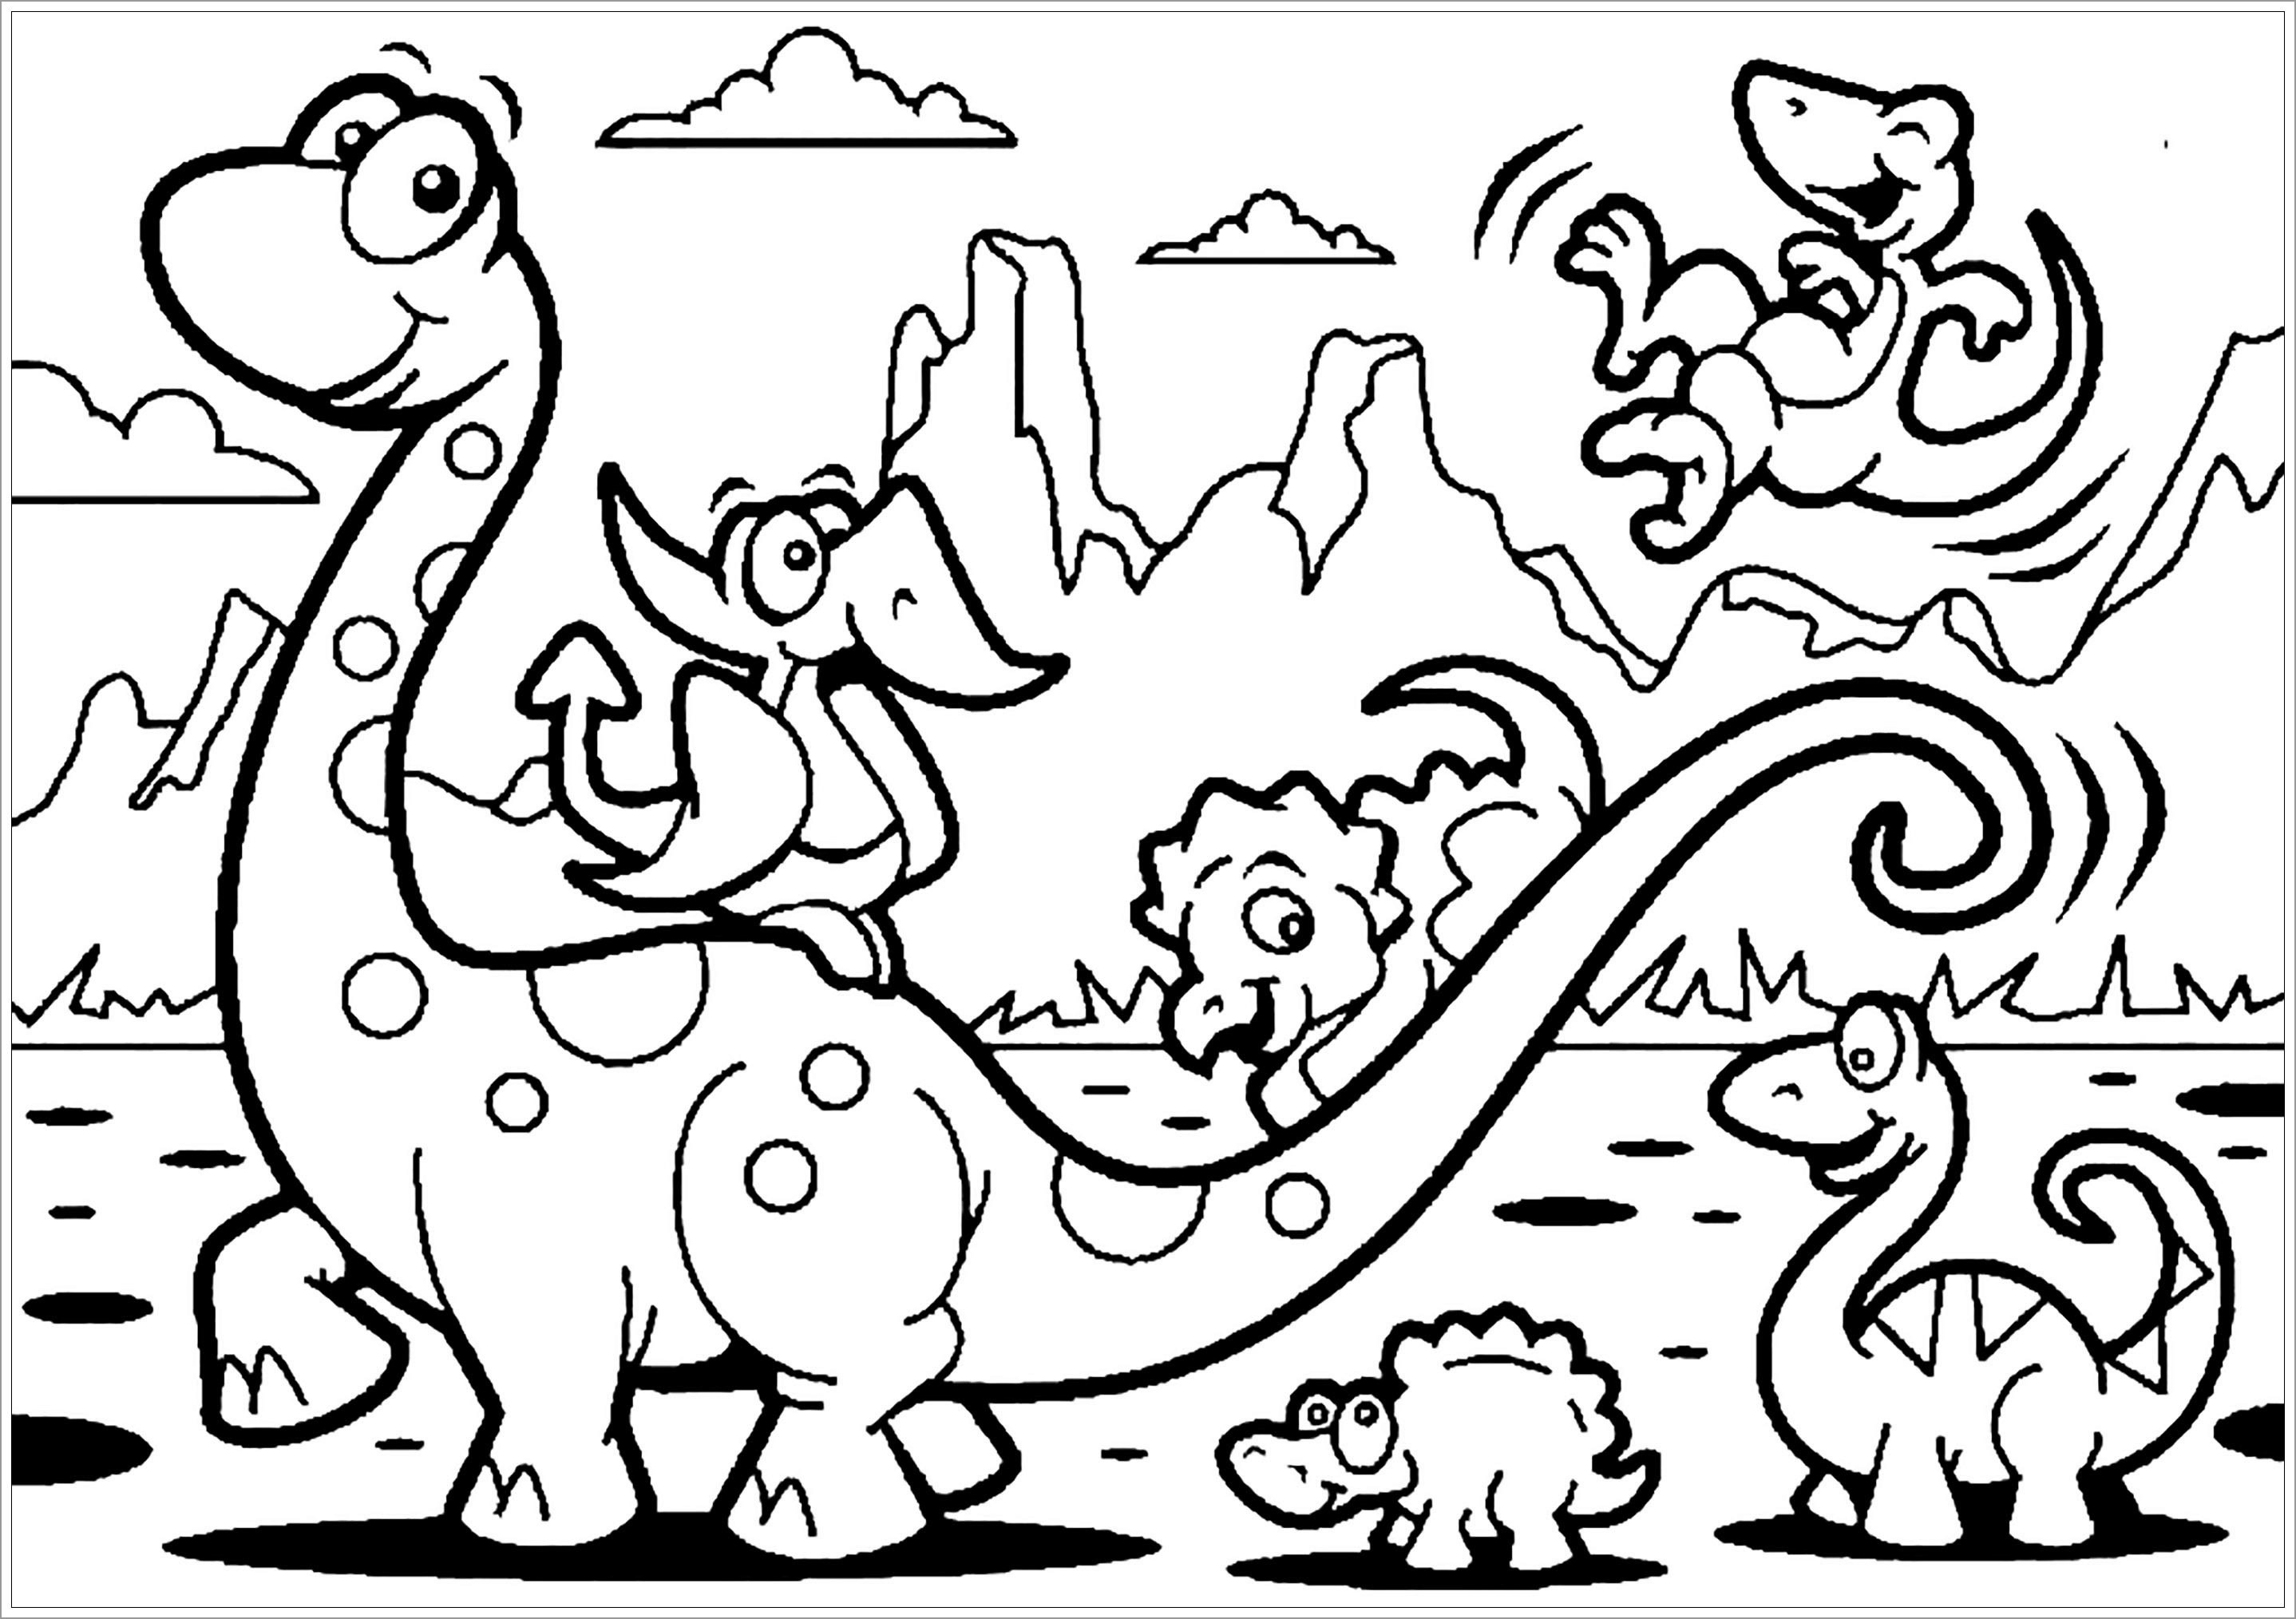 Dinosaur Coloring Page for toddlers   ColoringBay